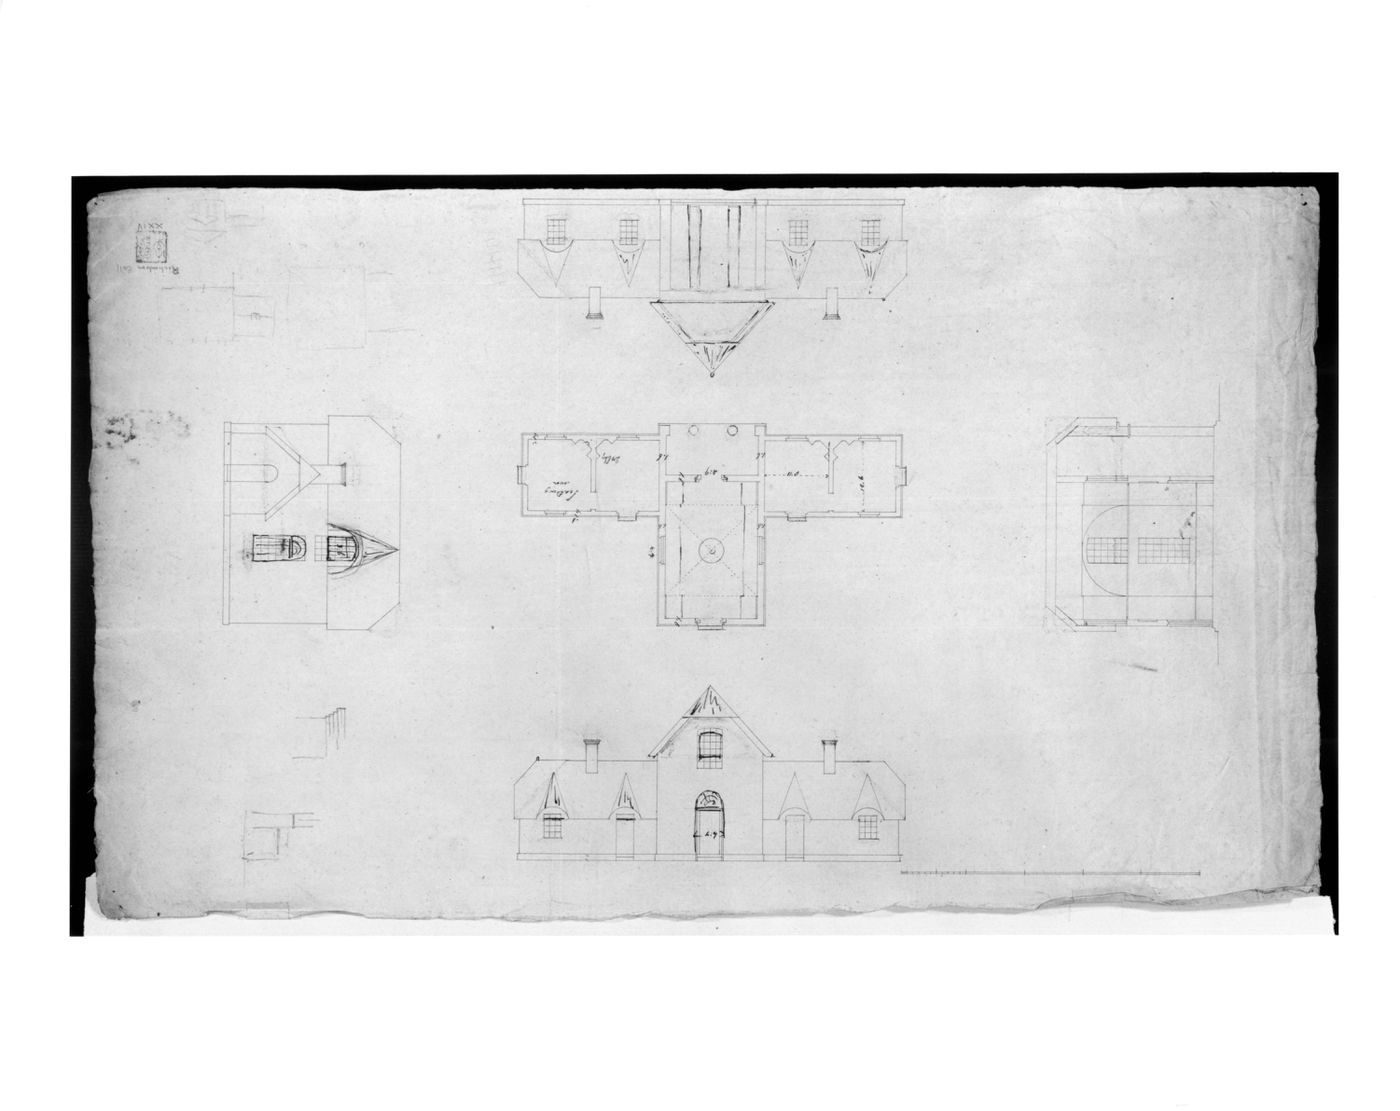 Design for Wimpole Hall, Cambridgeshire: Measured plan, elevations and section for a rustic dairy, with slight sketches for rooflines and a facade of a country house